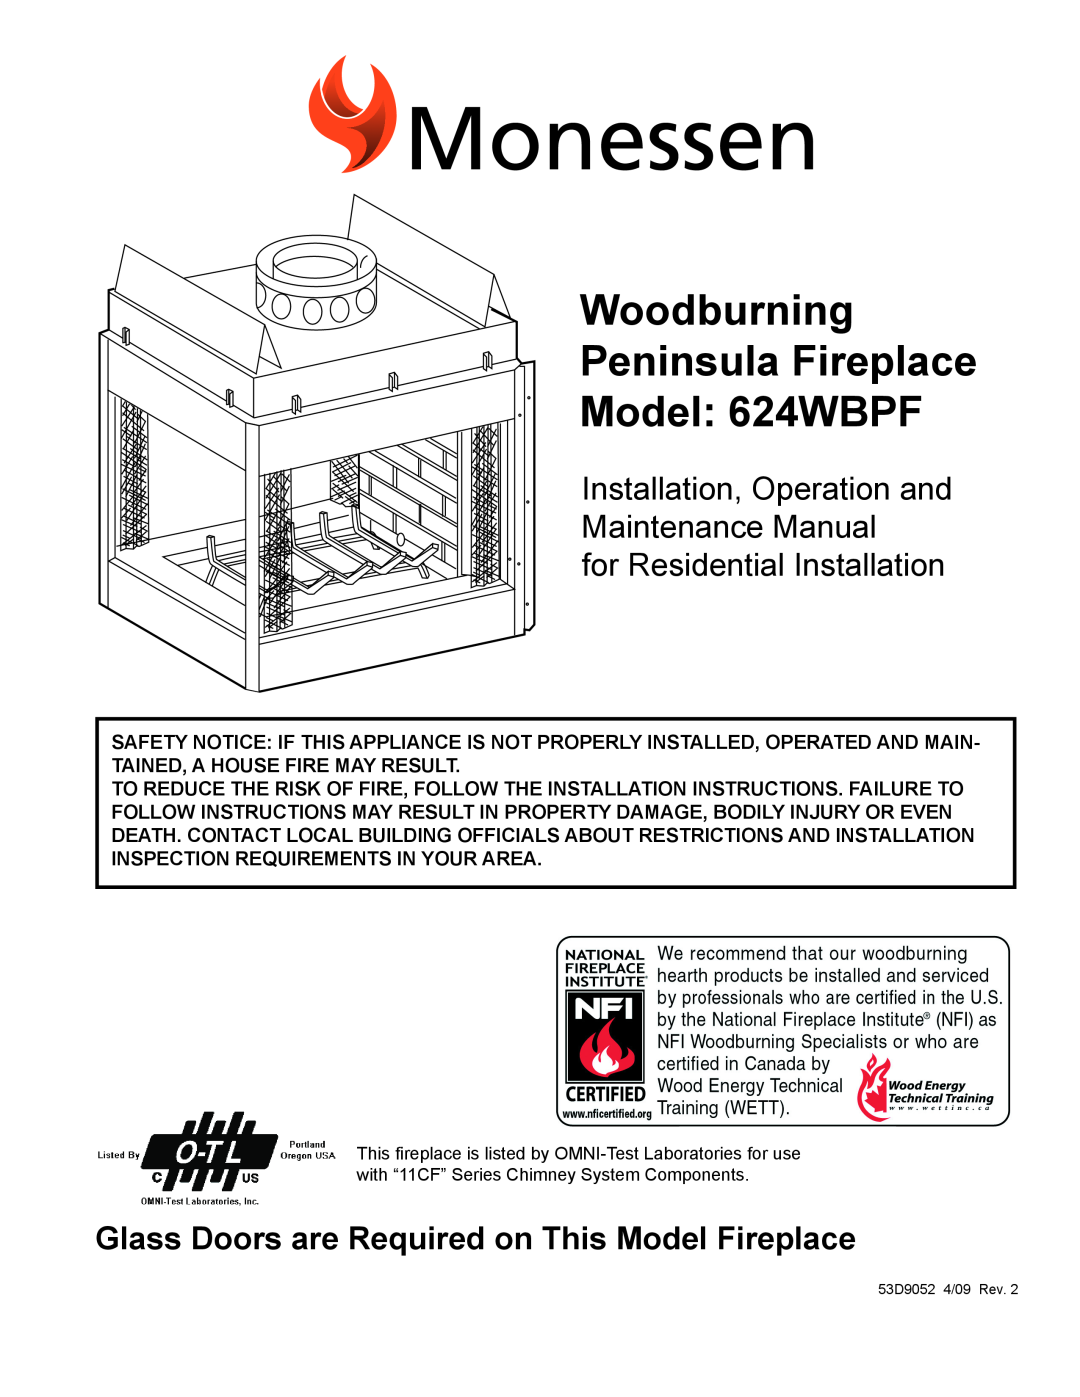 Monessen Hearth brochure Peninsula 624WBPF Radiant Wood Burning, Hpba, Product Specifications, Made In U.S.A 